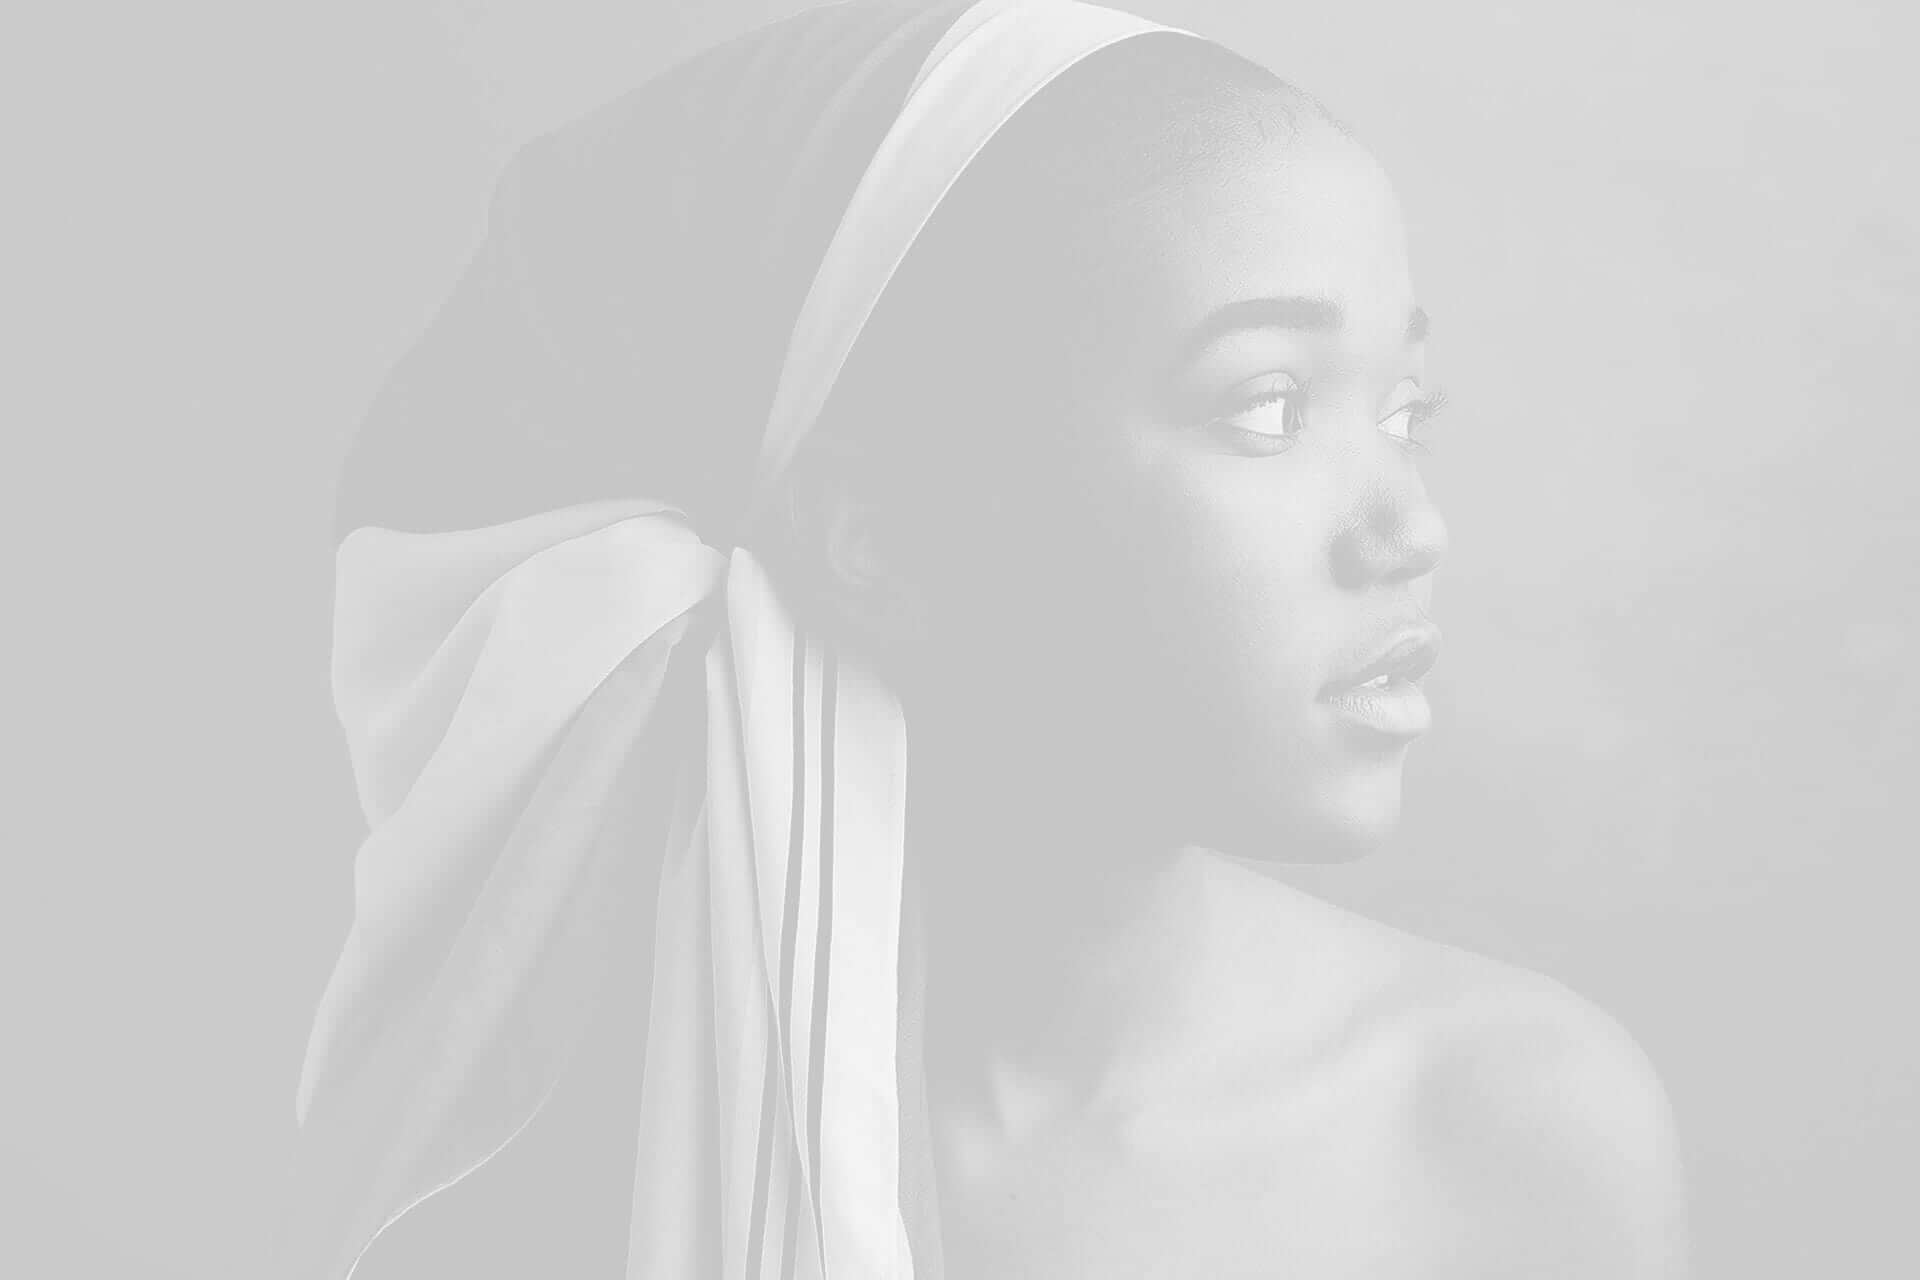 Black and white portrait of a young woman with a headscarf looking to the side, against a grey background.